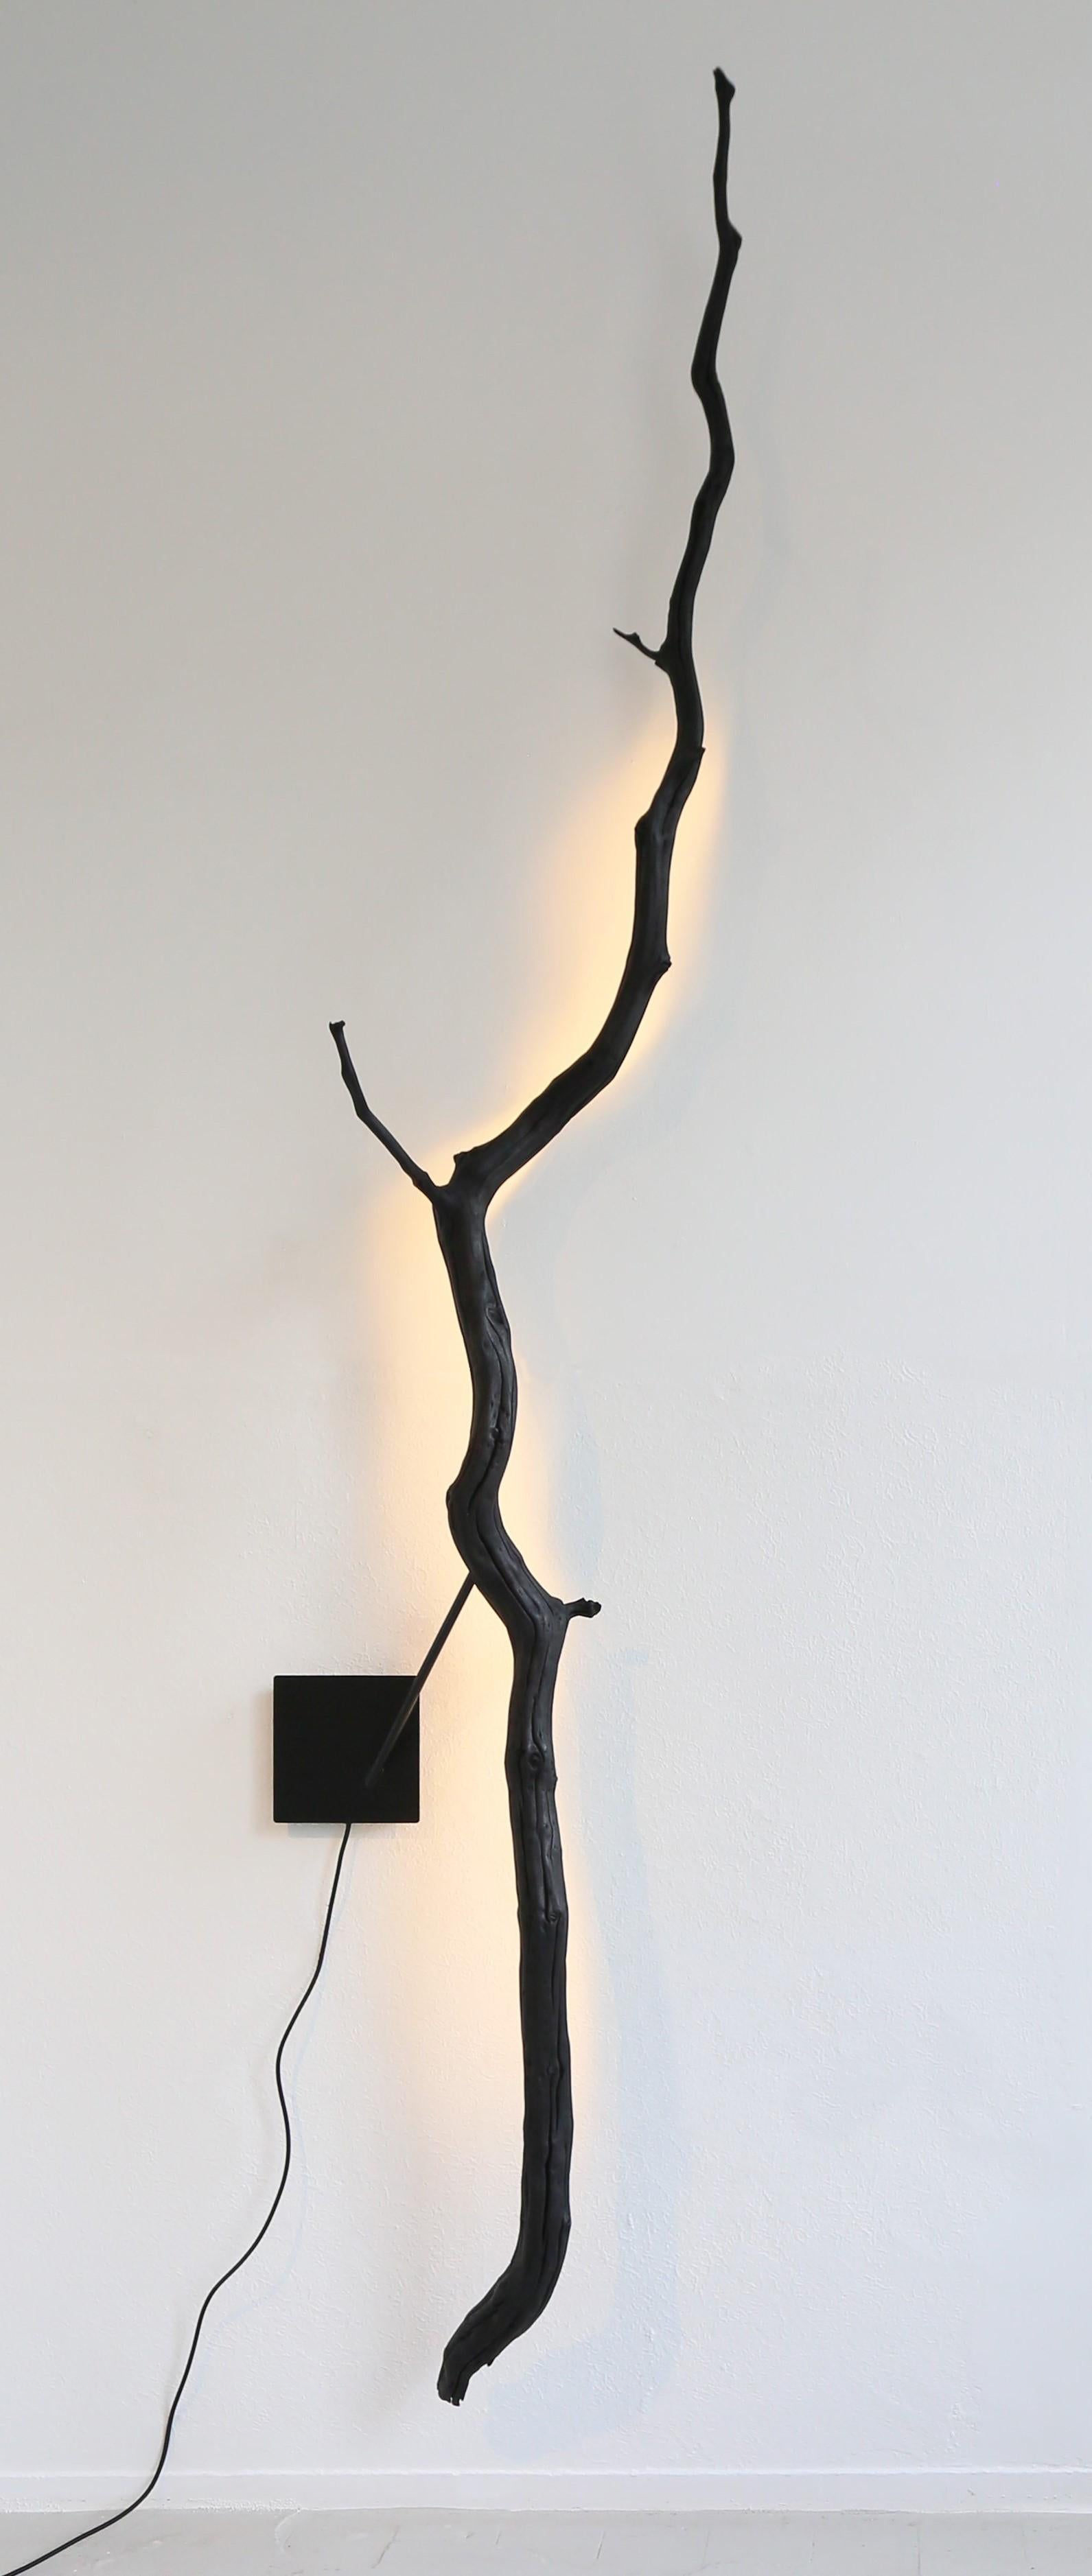 Unique burning ego wall lamp by Jesse Sanderson
Dimensions: Made to measure
Material: Burned oak wood
Different dimensions can be ordered. 

The Burning Ego Wall light is designed to celebrate the essence of the weathered branch. It reminds us